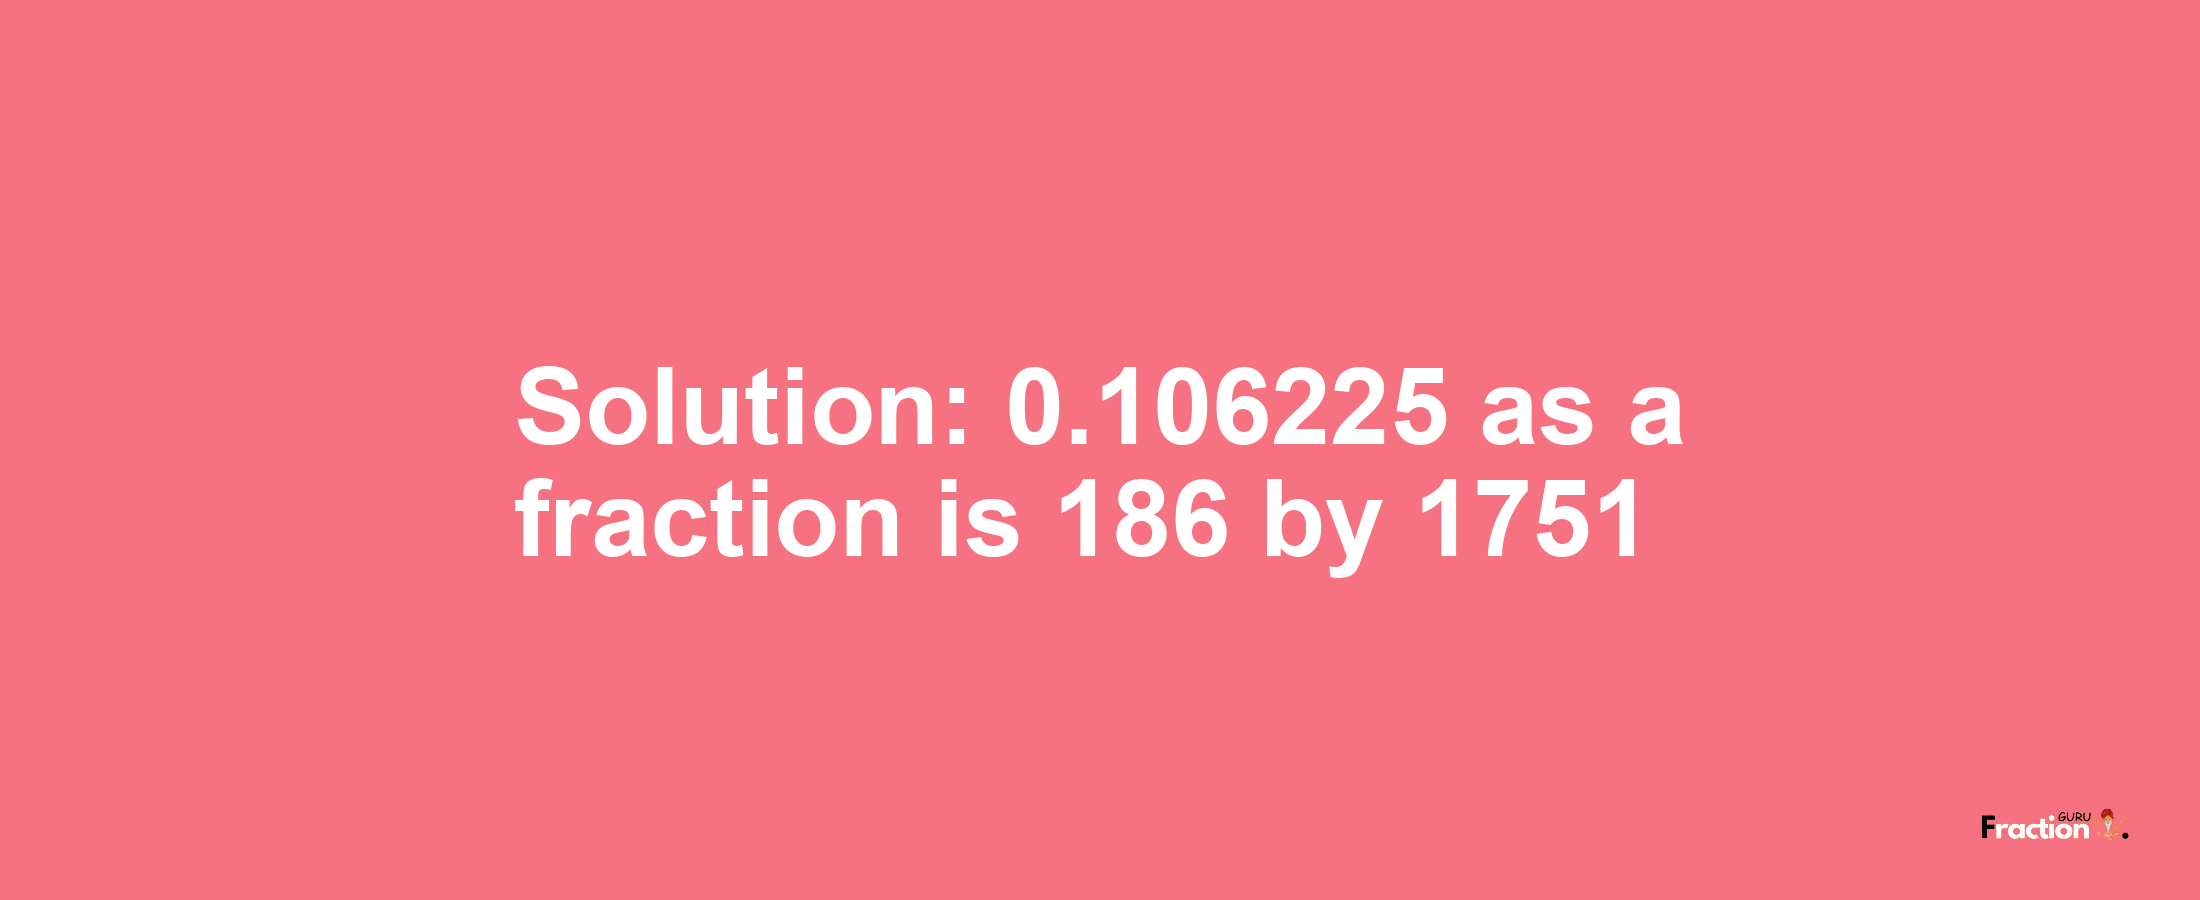 Solution:0.106225 as a fraction is 186/1751